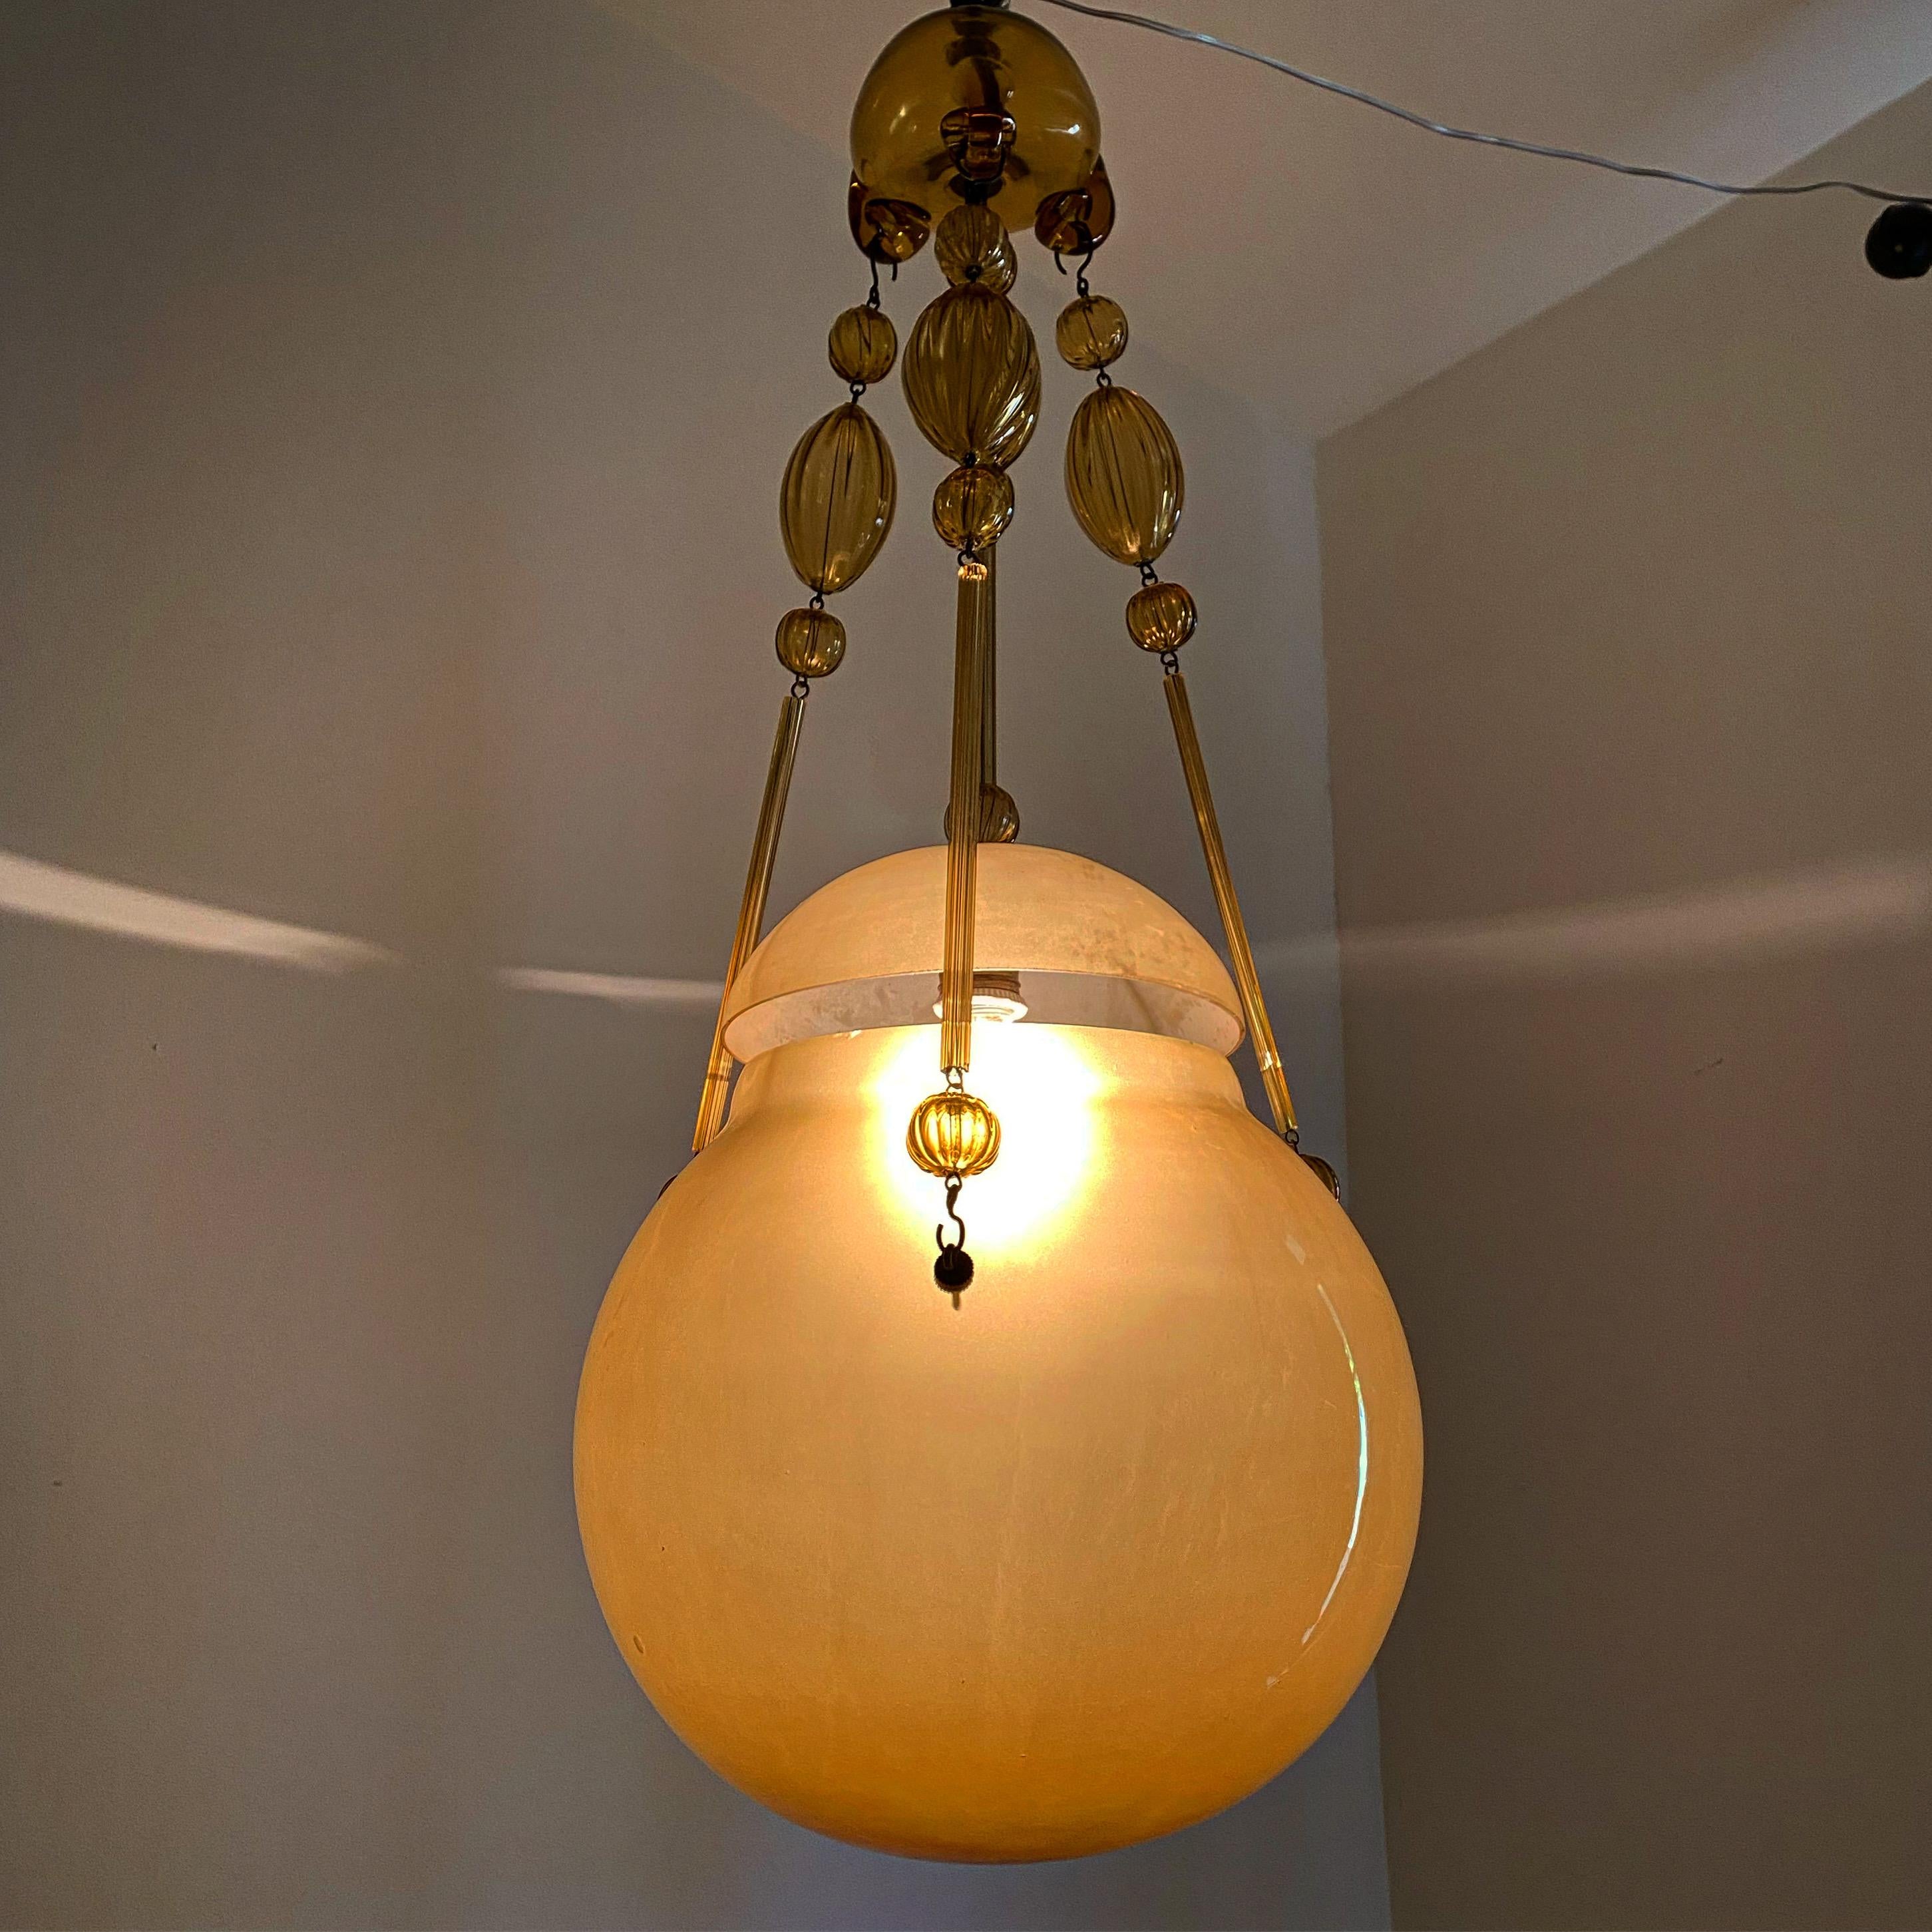 Beautiful and Large pendant lantern in hand blown amber Murano glass and brass.
The quality of the glass points to one of the major factories like Venini or AVEM, in Murano but we have not yet been able to attribute it.
Measures: Total height is